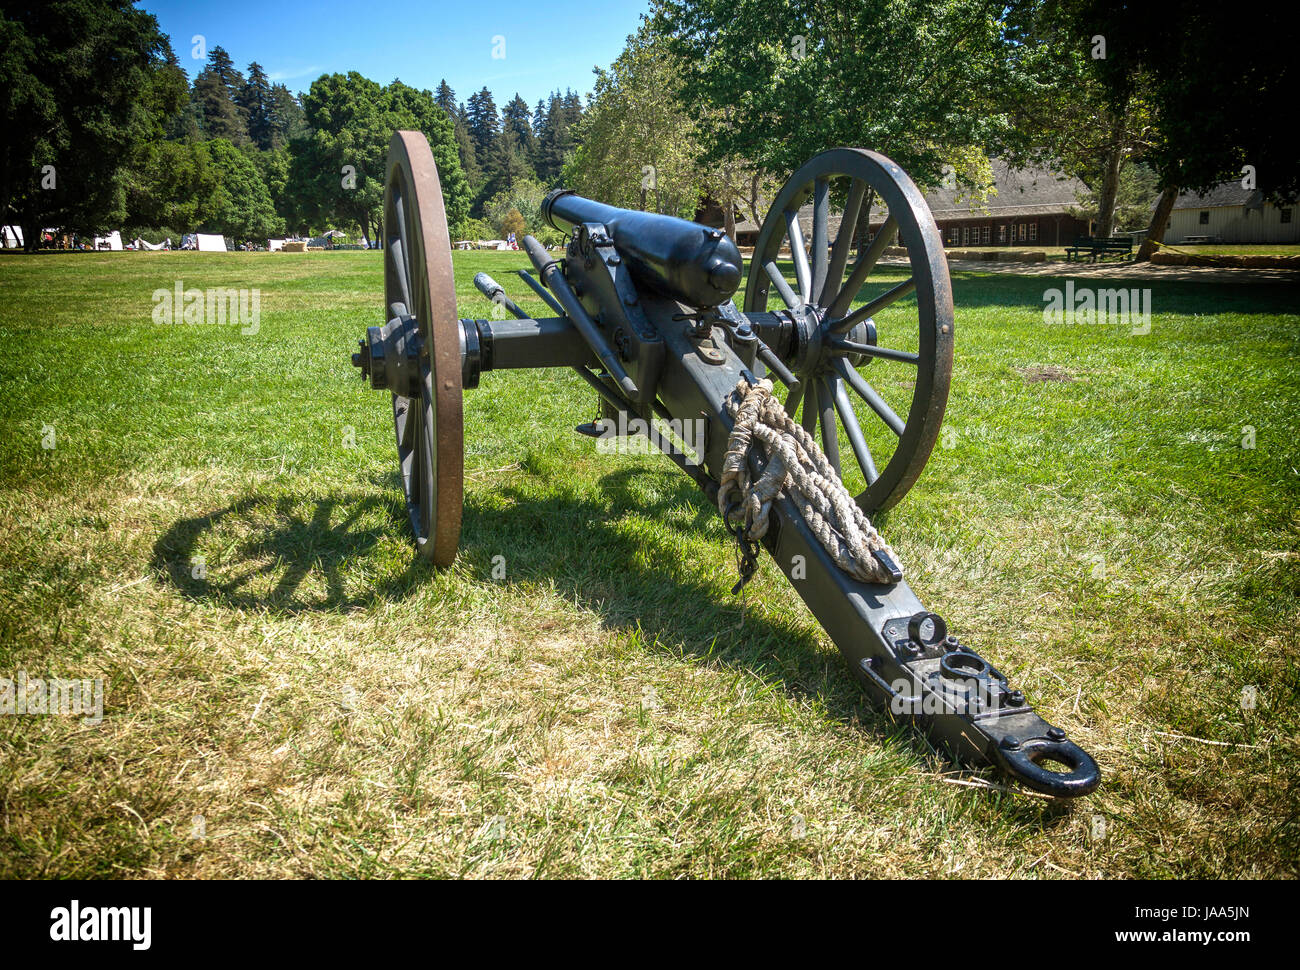 A canon displayed at a Civil War reenactment at Roaring Camp located in